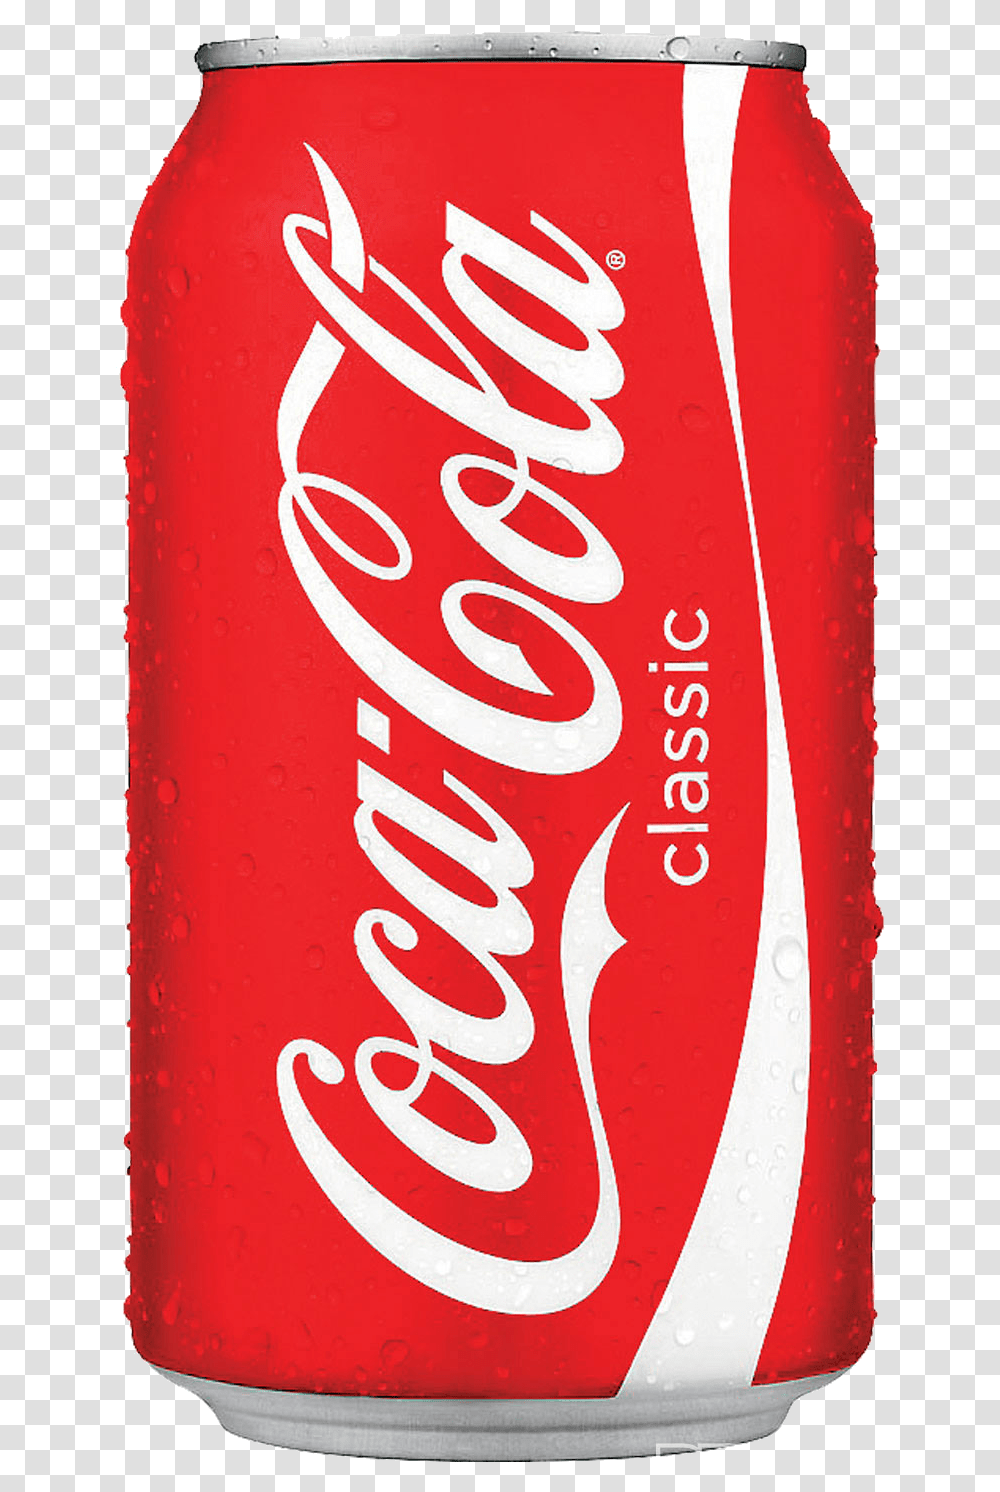 Coke & Clipart Free Download Ywd Coca Cola Can English, Beverage, Drink, Soda, Tin Transparent Png